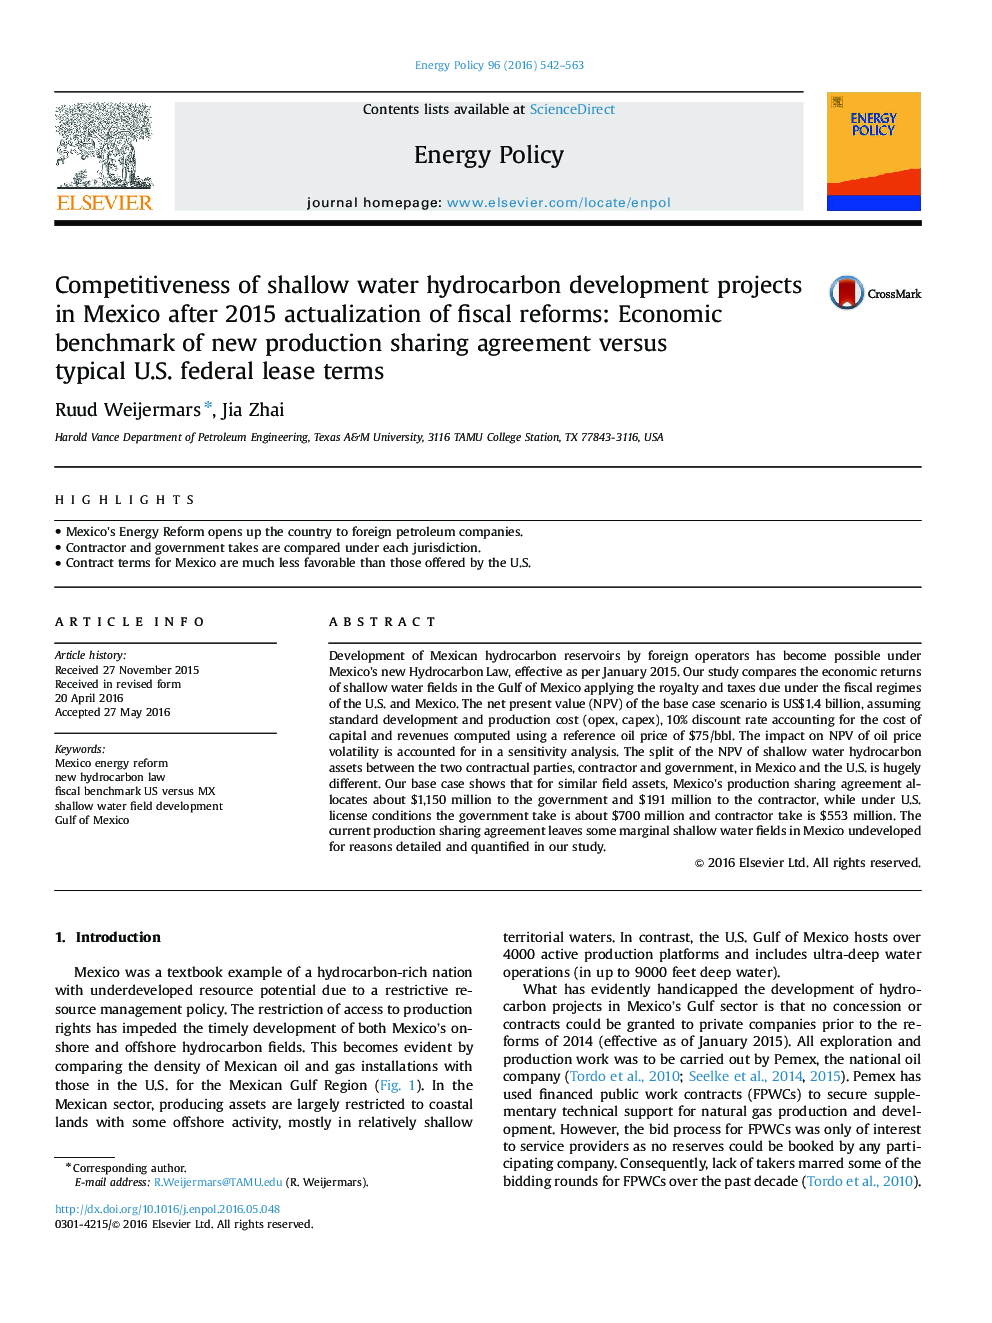 Competitiveness of shallow water hydrocarbon development projects in Mexico after 2015 actualization of fiscal reforms: Economic benchmark of new production sharing agreement versus typical U.S. federal lease terms